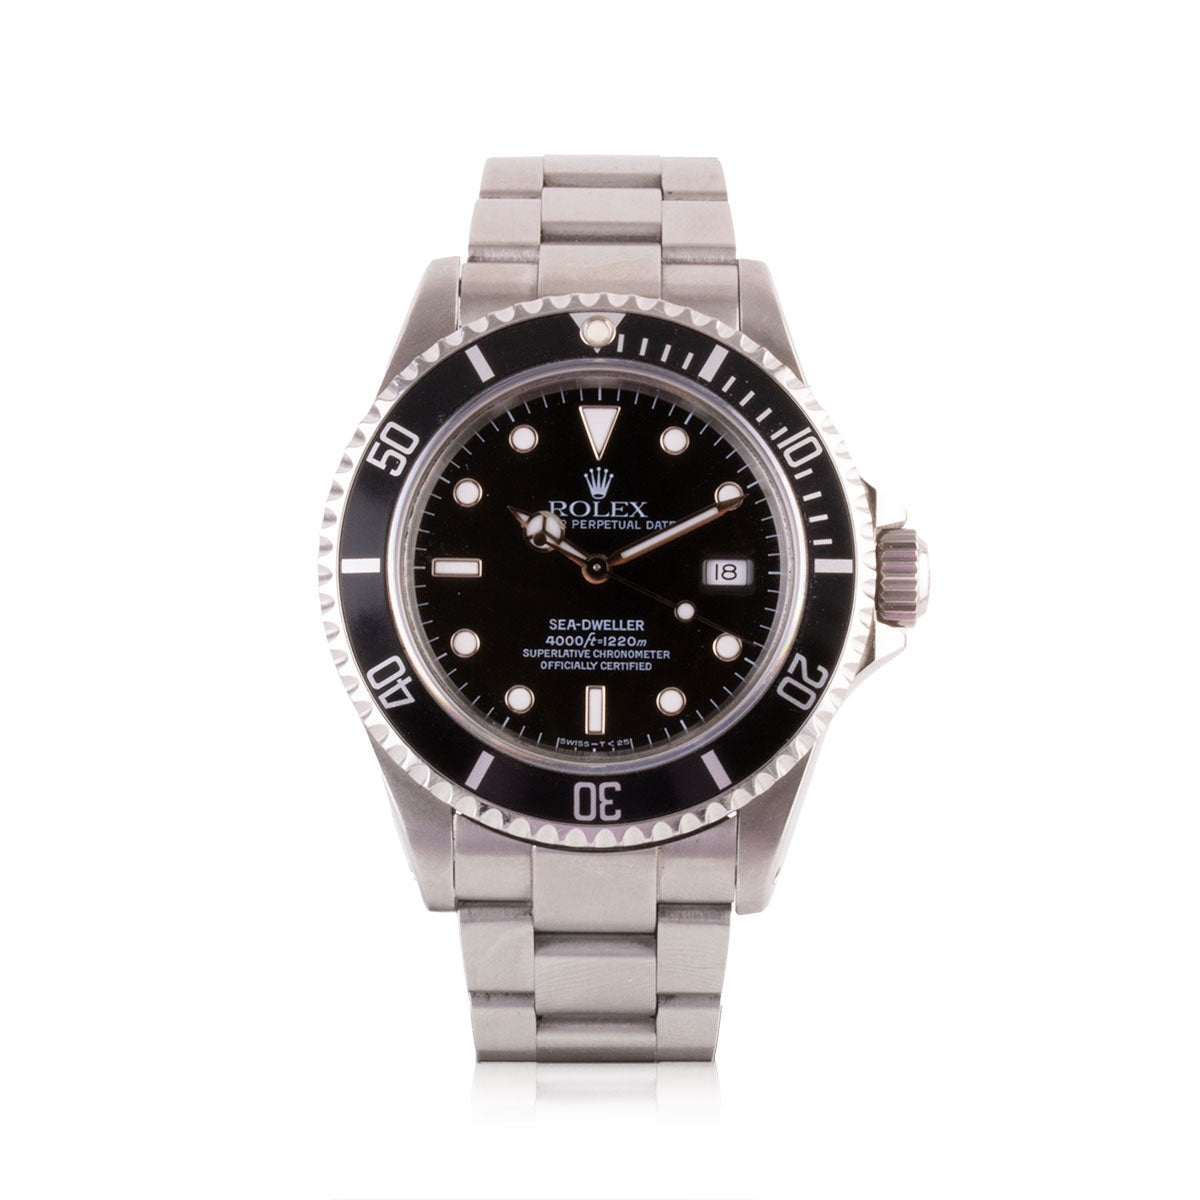 Second-hand watch - Rolex - Oyster Perpetual Date Sea-Dweller - 14000€